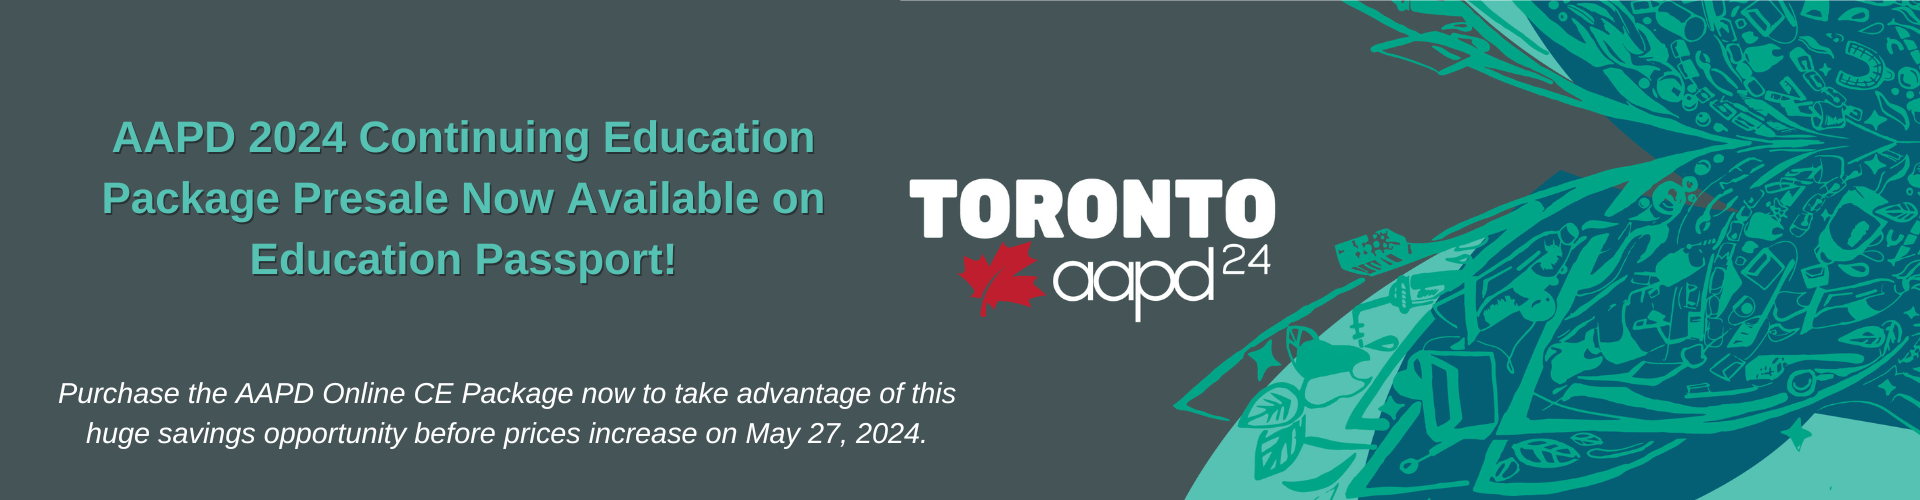 AAPD 2024 Presale Now Available